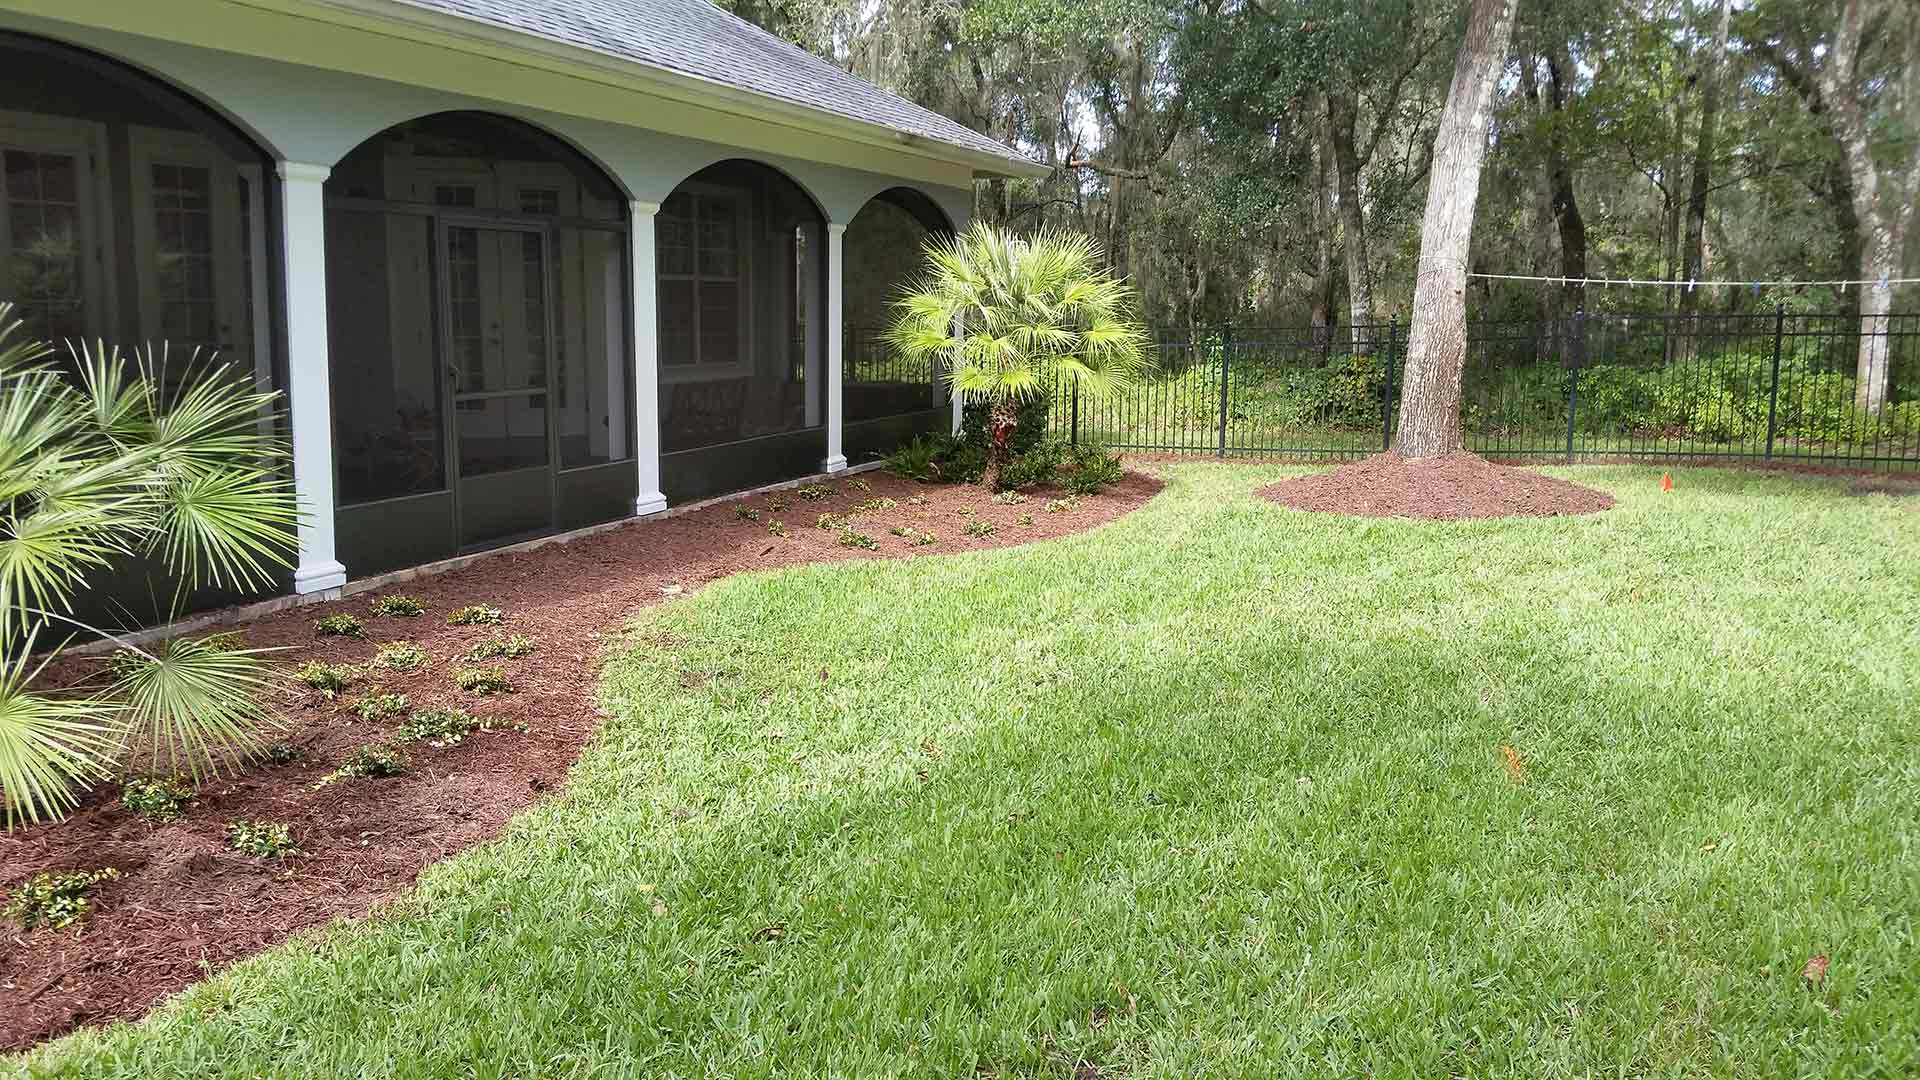 Backyard of a residential customer who is receiving lawn mowing and maintenance services.